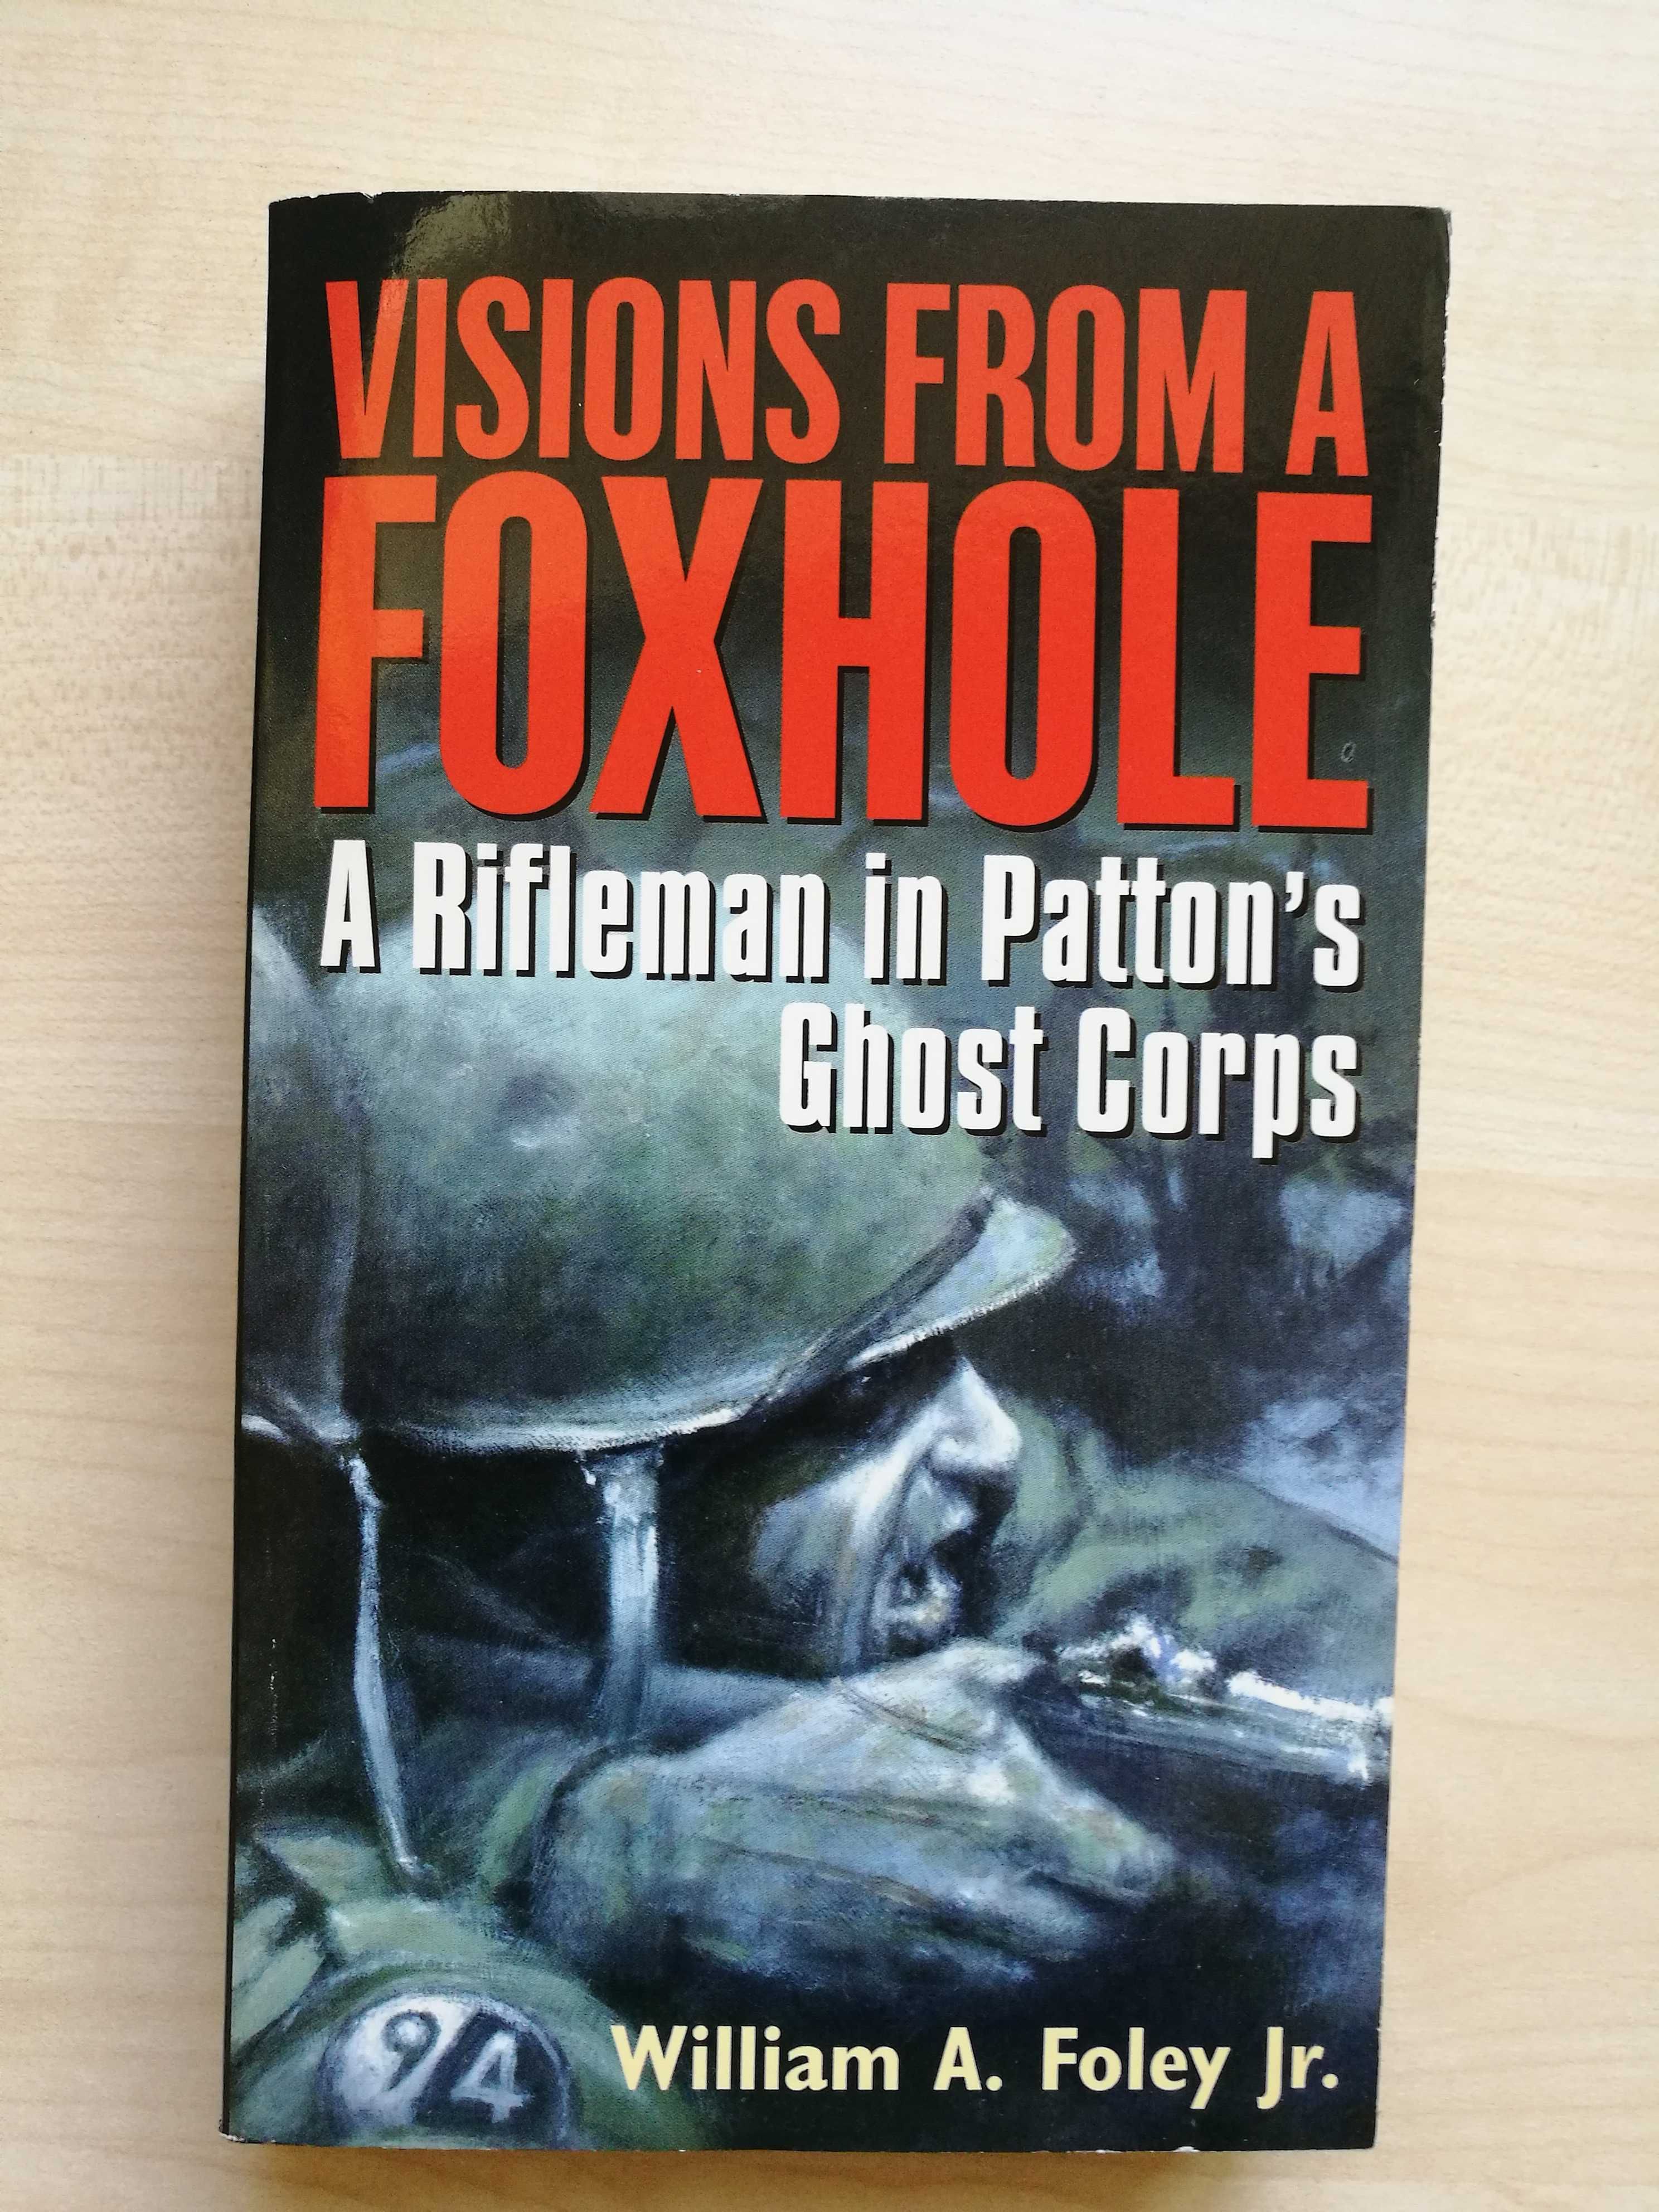 William A. Foley Jr. – Visions From a Foxhole. A riffleman in Patton’s